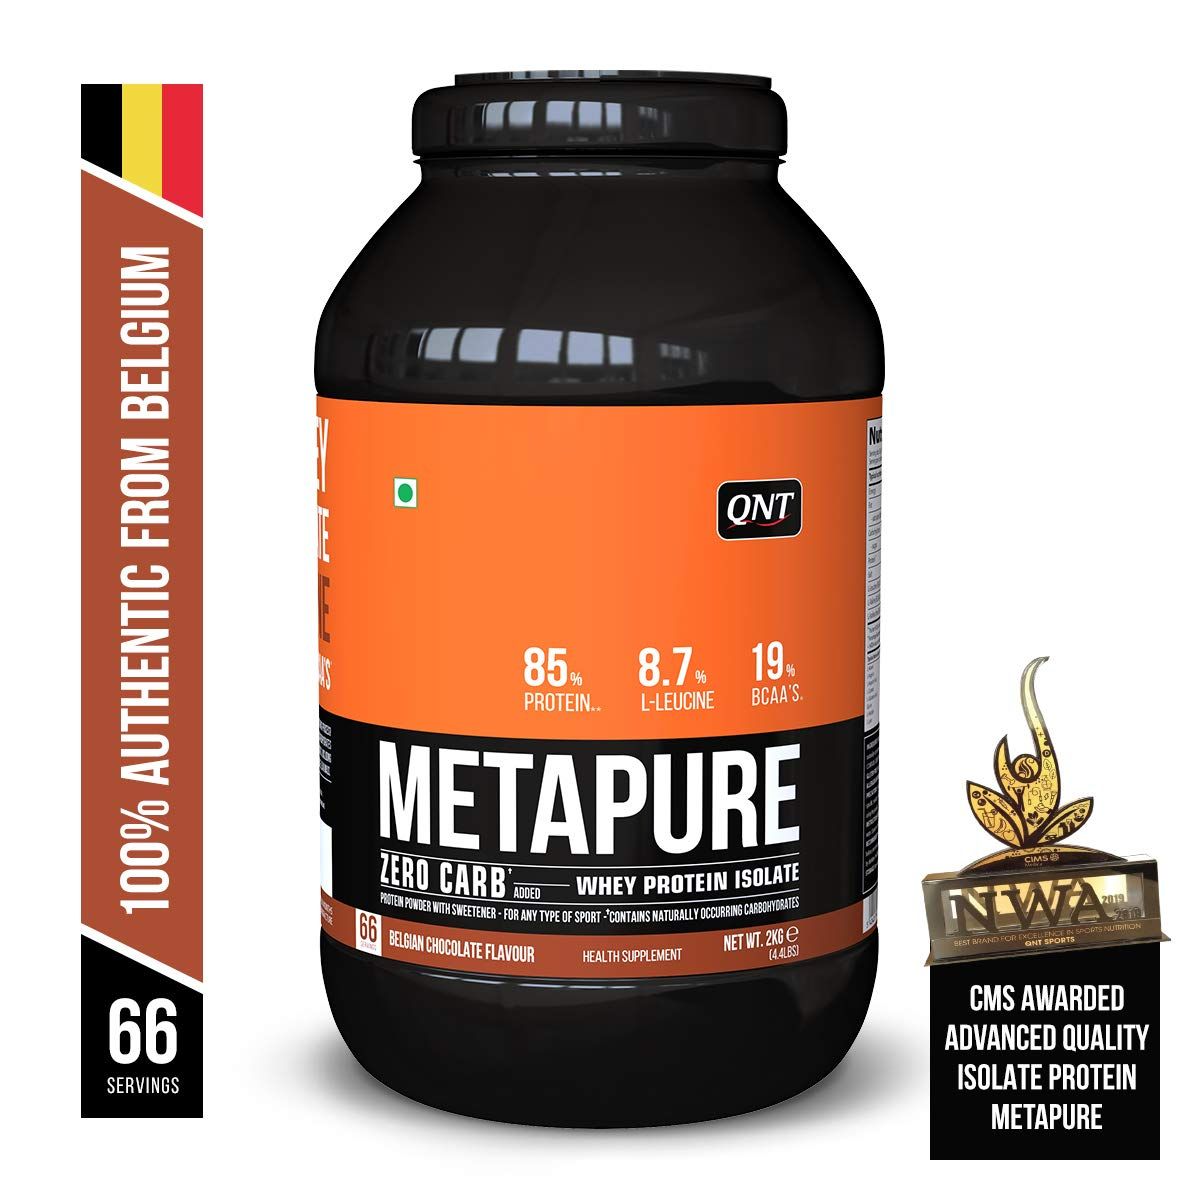 QNT Metapure Zero Carb 100% Pure Whey Isolate Belgian Chocolate Flavour Powder, 2 kg, Pack of 1 